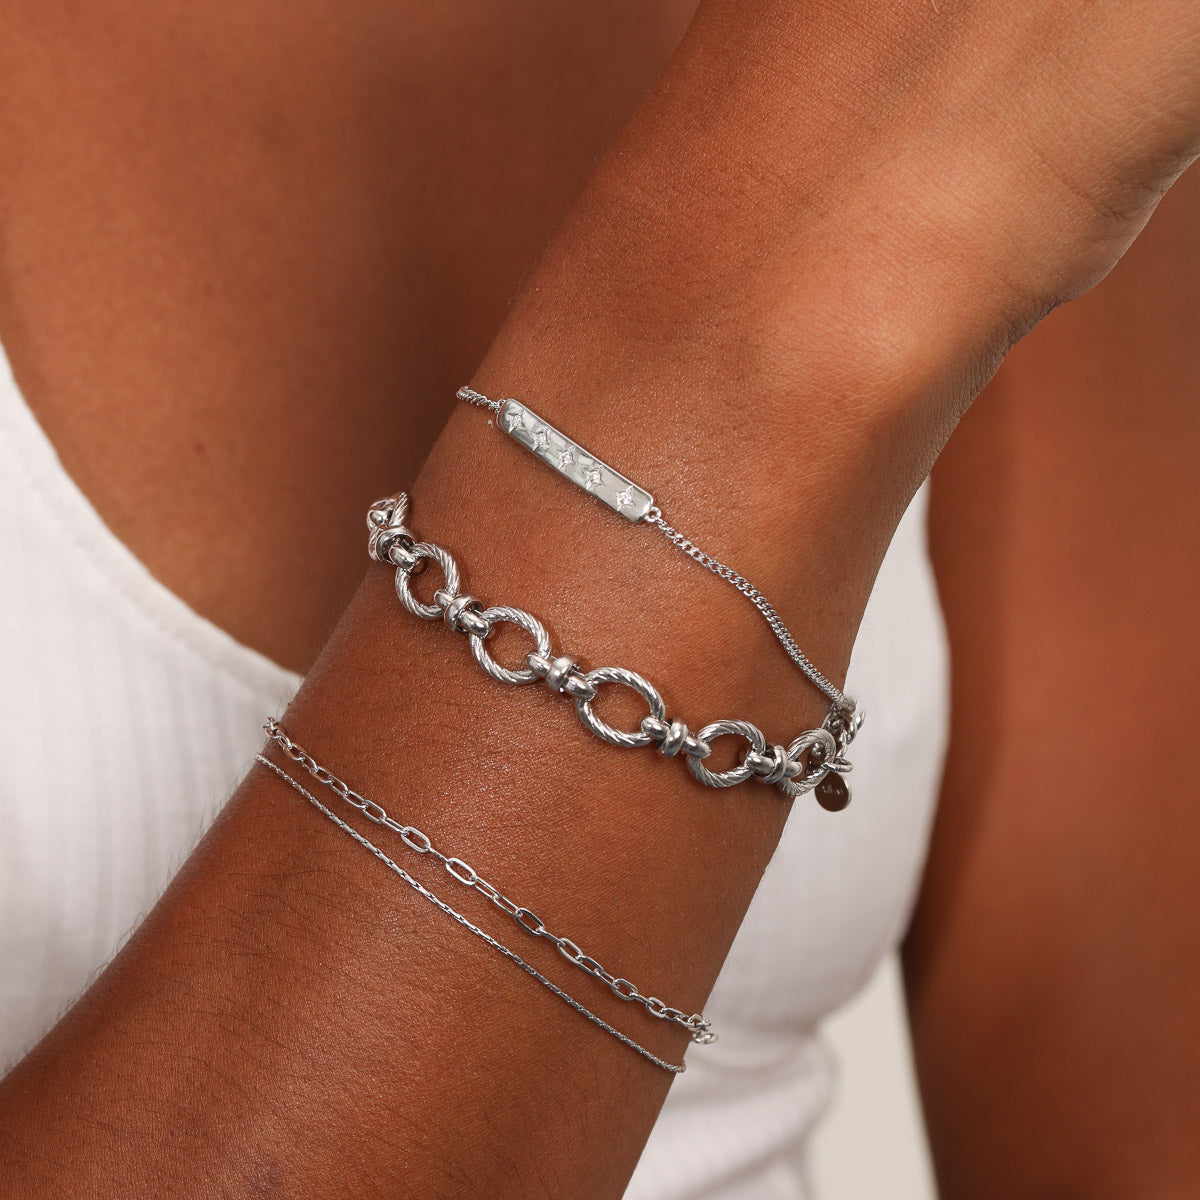 Cosmic Star Bar Bracelet in Silver worn stacked with other bracelets